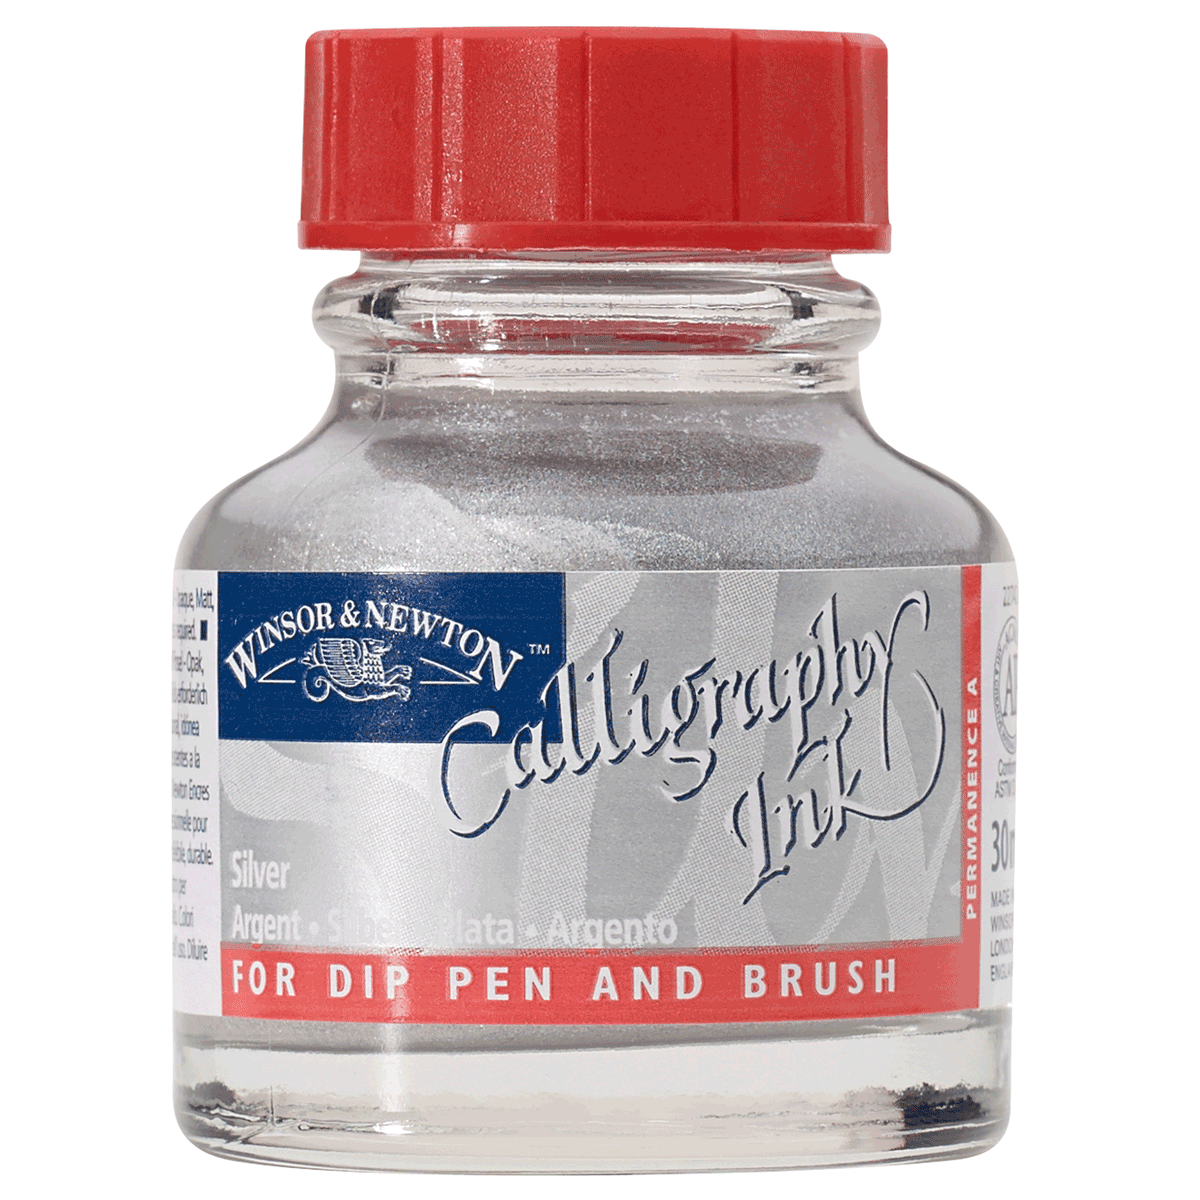 Winsor & Newton Calligraphy Ink - Silver 30ml